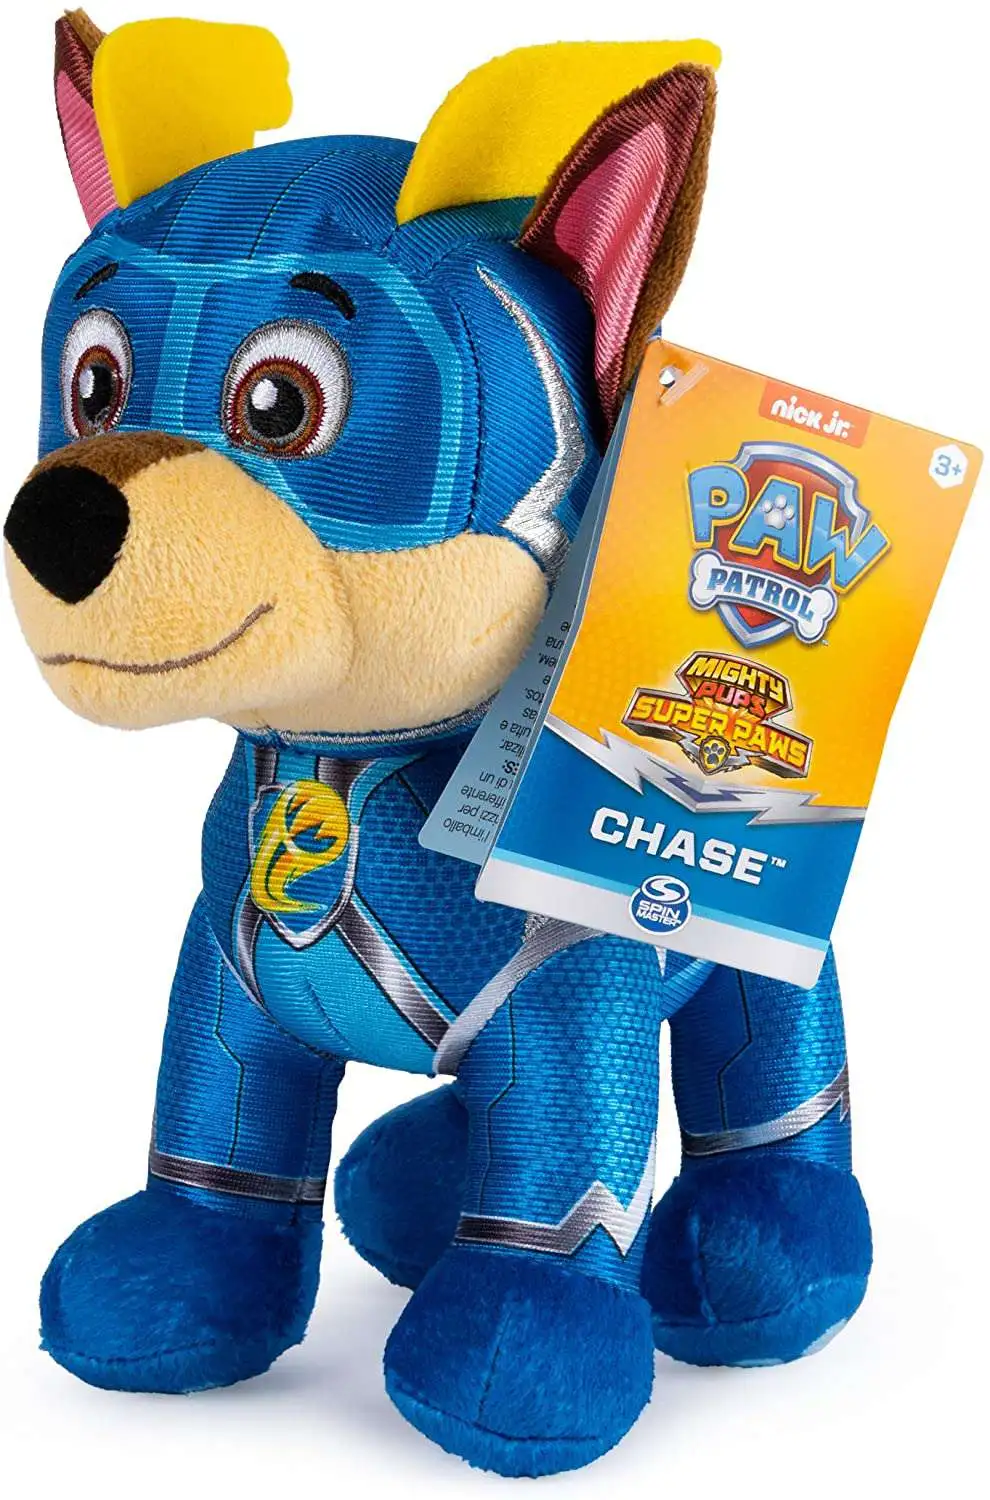 Nickelodeon Paw Patrol Mighty Pups Super Paws Rubble 8” Plush Toy NEW 